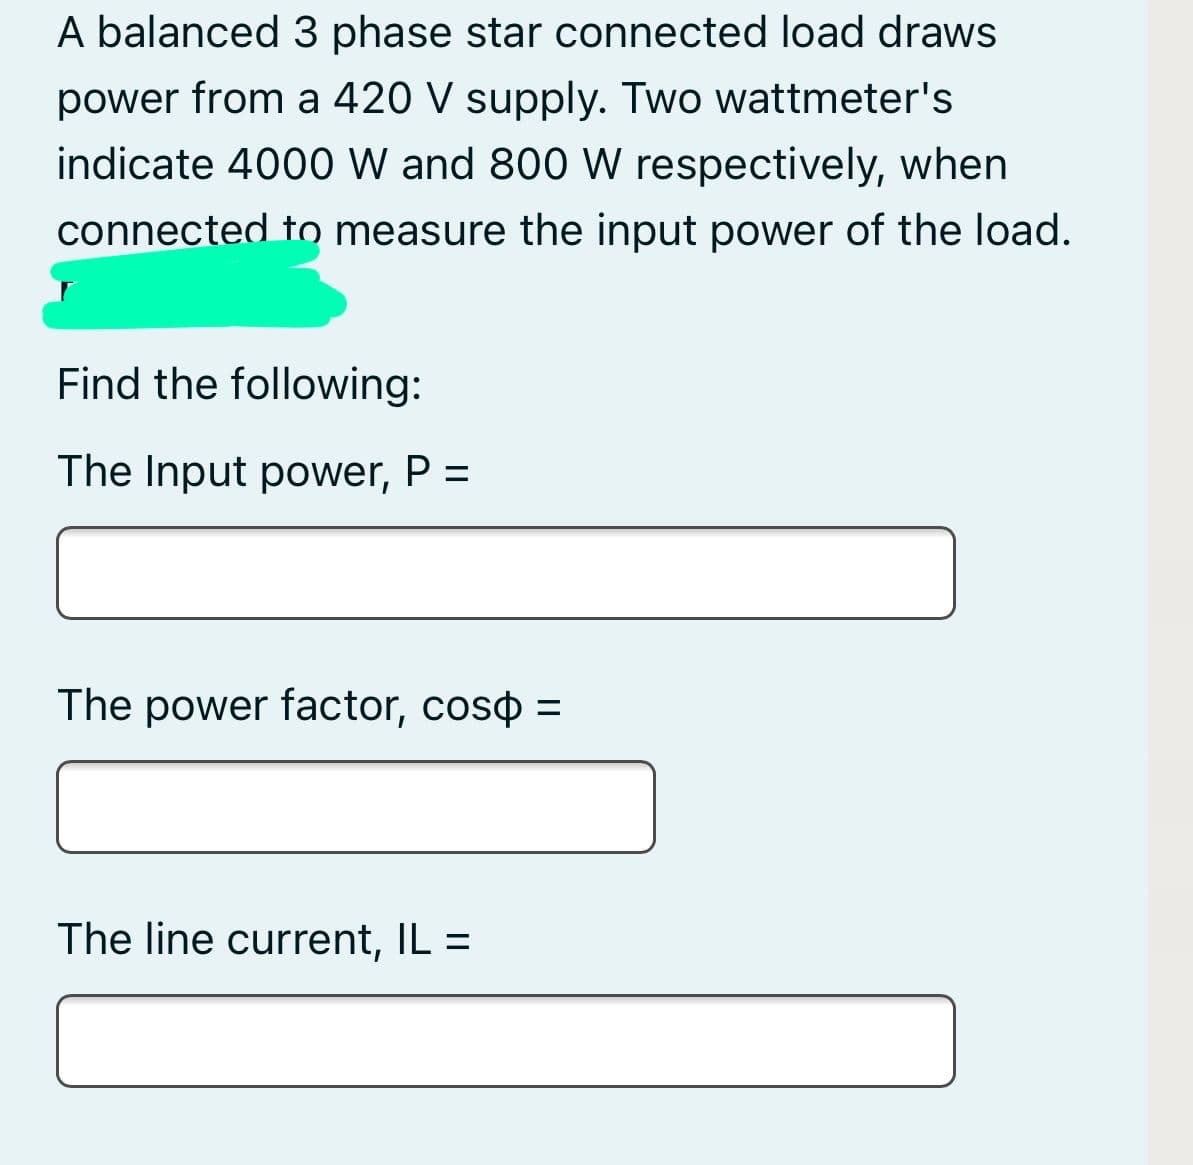 A balanced 3 phase star connected load draws
power from a 420 V supply. Two wattmeter's
indicate 4000 W and 800 W respectively, when
connected to measure the input power of the load.
Find the following:
The Input power, P =
The power factor, coso =
The line current, IL =
